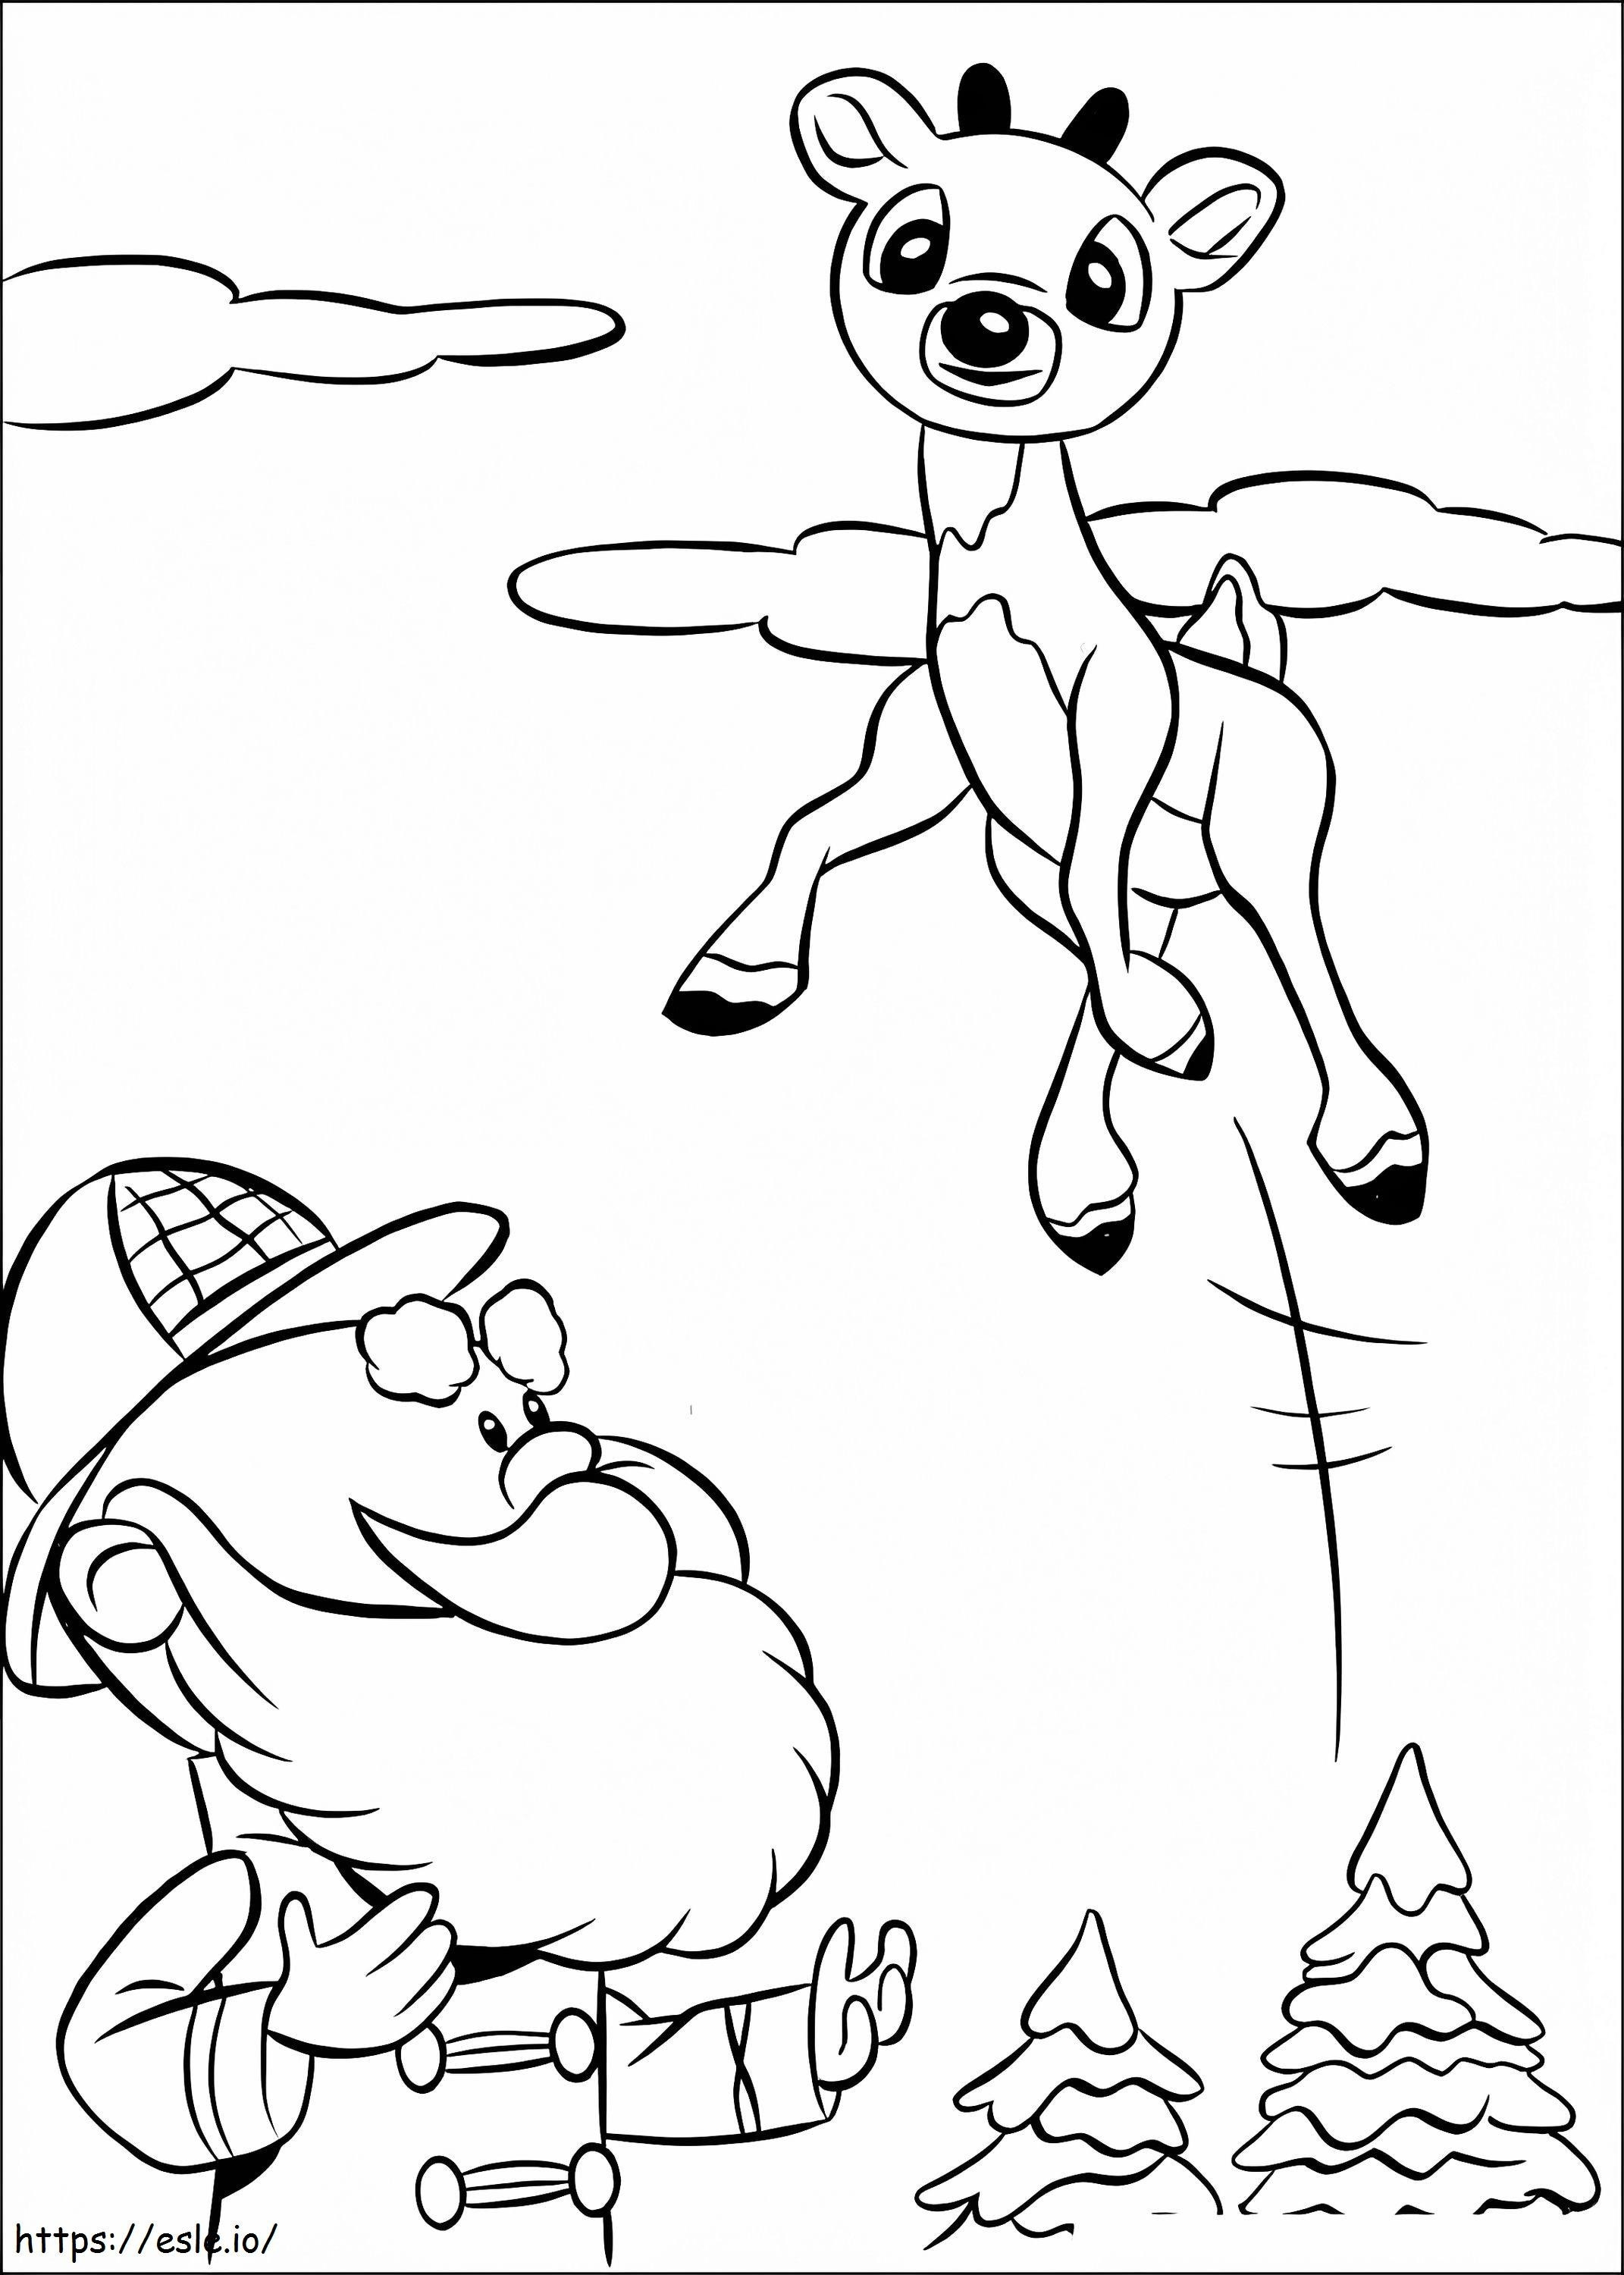 Rudolph Flying coloring page